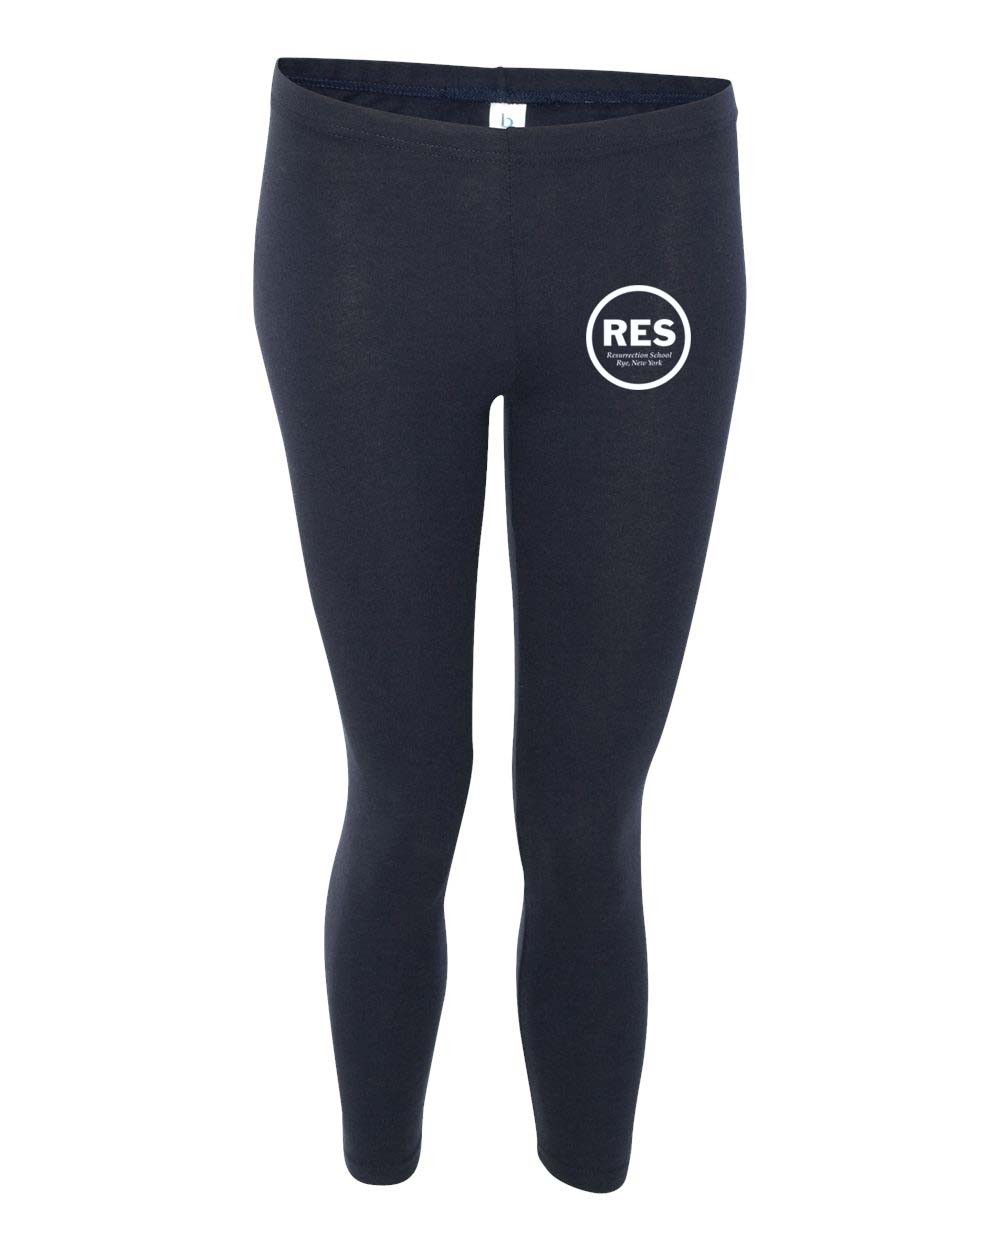 STAFF RES Wear Leggings w/ Logo - Please Allow 2-3 Weeks for Delivery